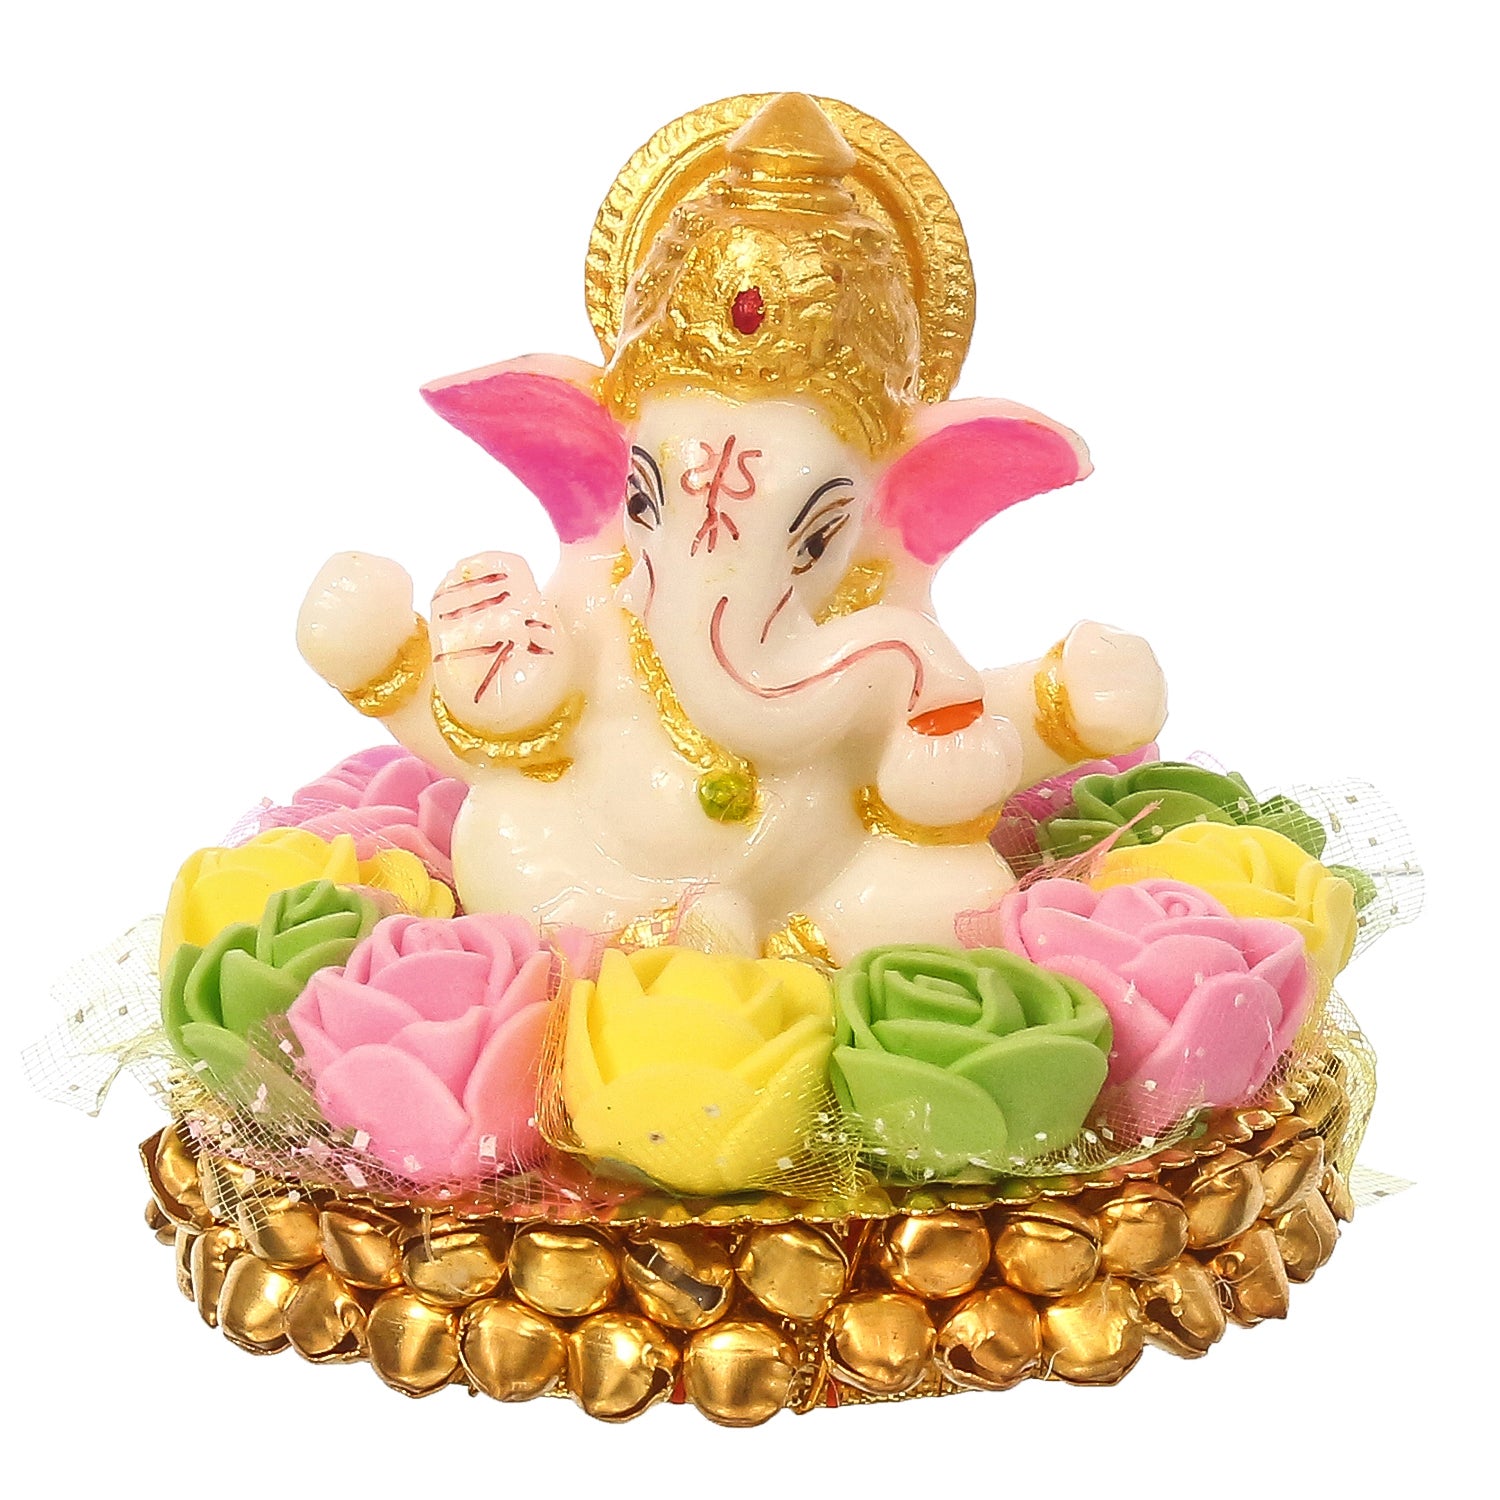 Polyresin Lord Ganesha Idol on Decorative Handcrafted Plate with Colorful Flowers 2